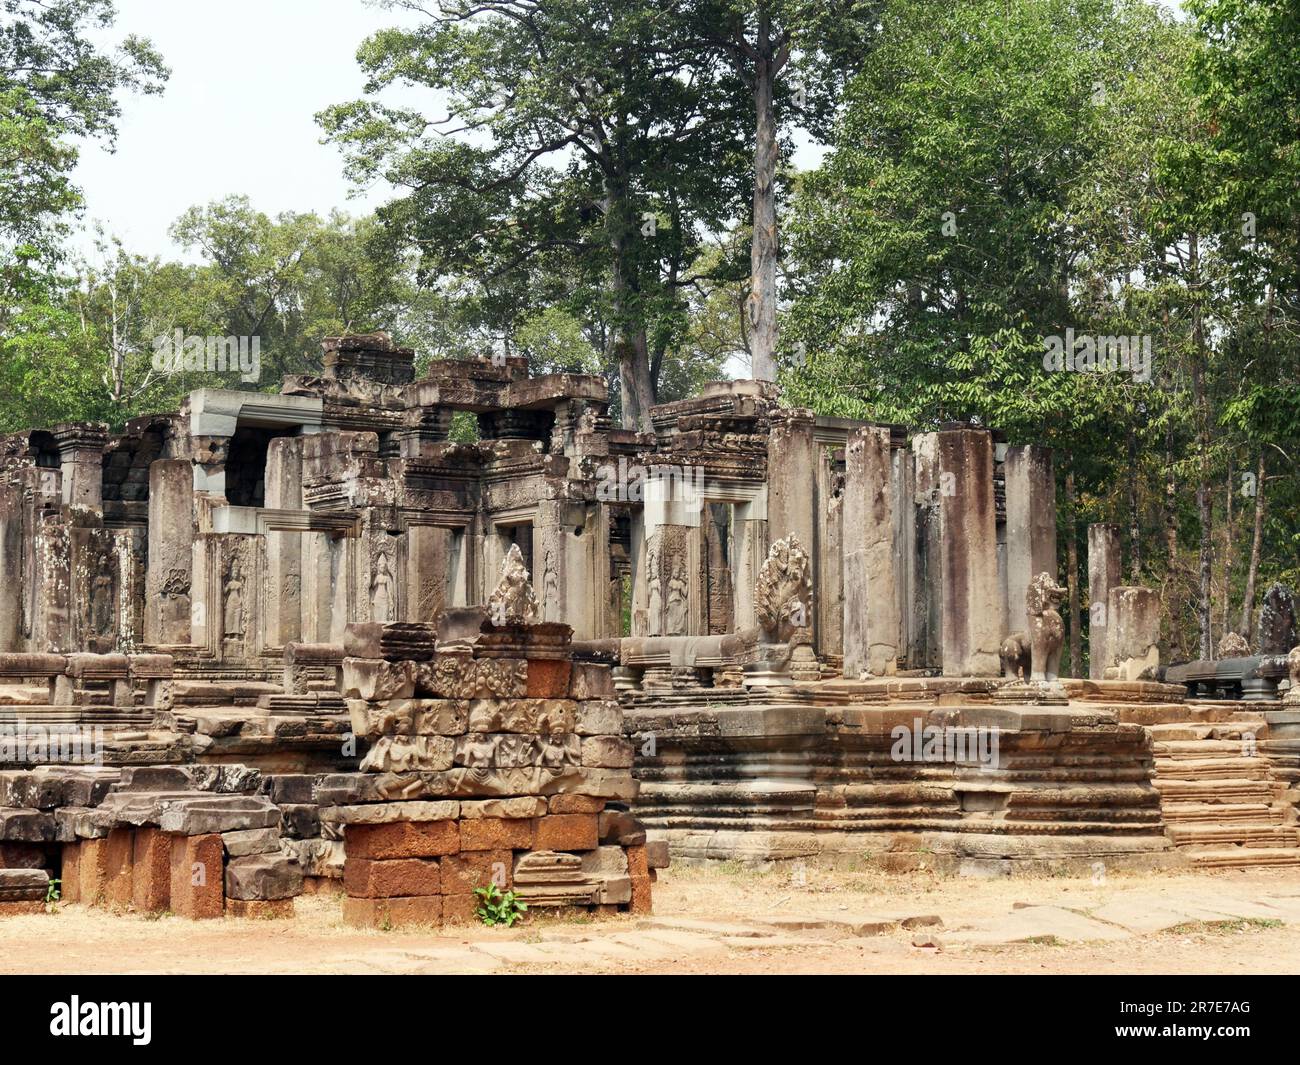 BayonTemple, Siem Reap Province, Angkor's Temple Complex Site listed as World Heritage by Unesco in 1192, built by King Jayavarman VII between XIIth a Stock Photo